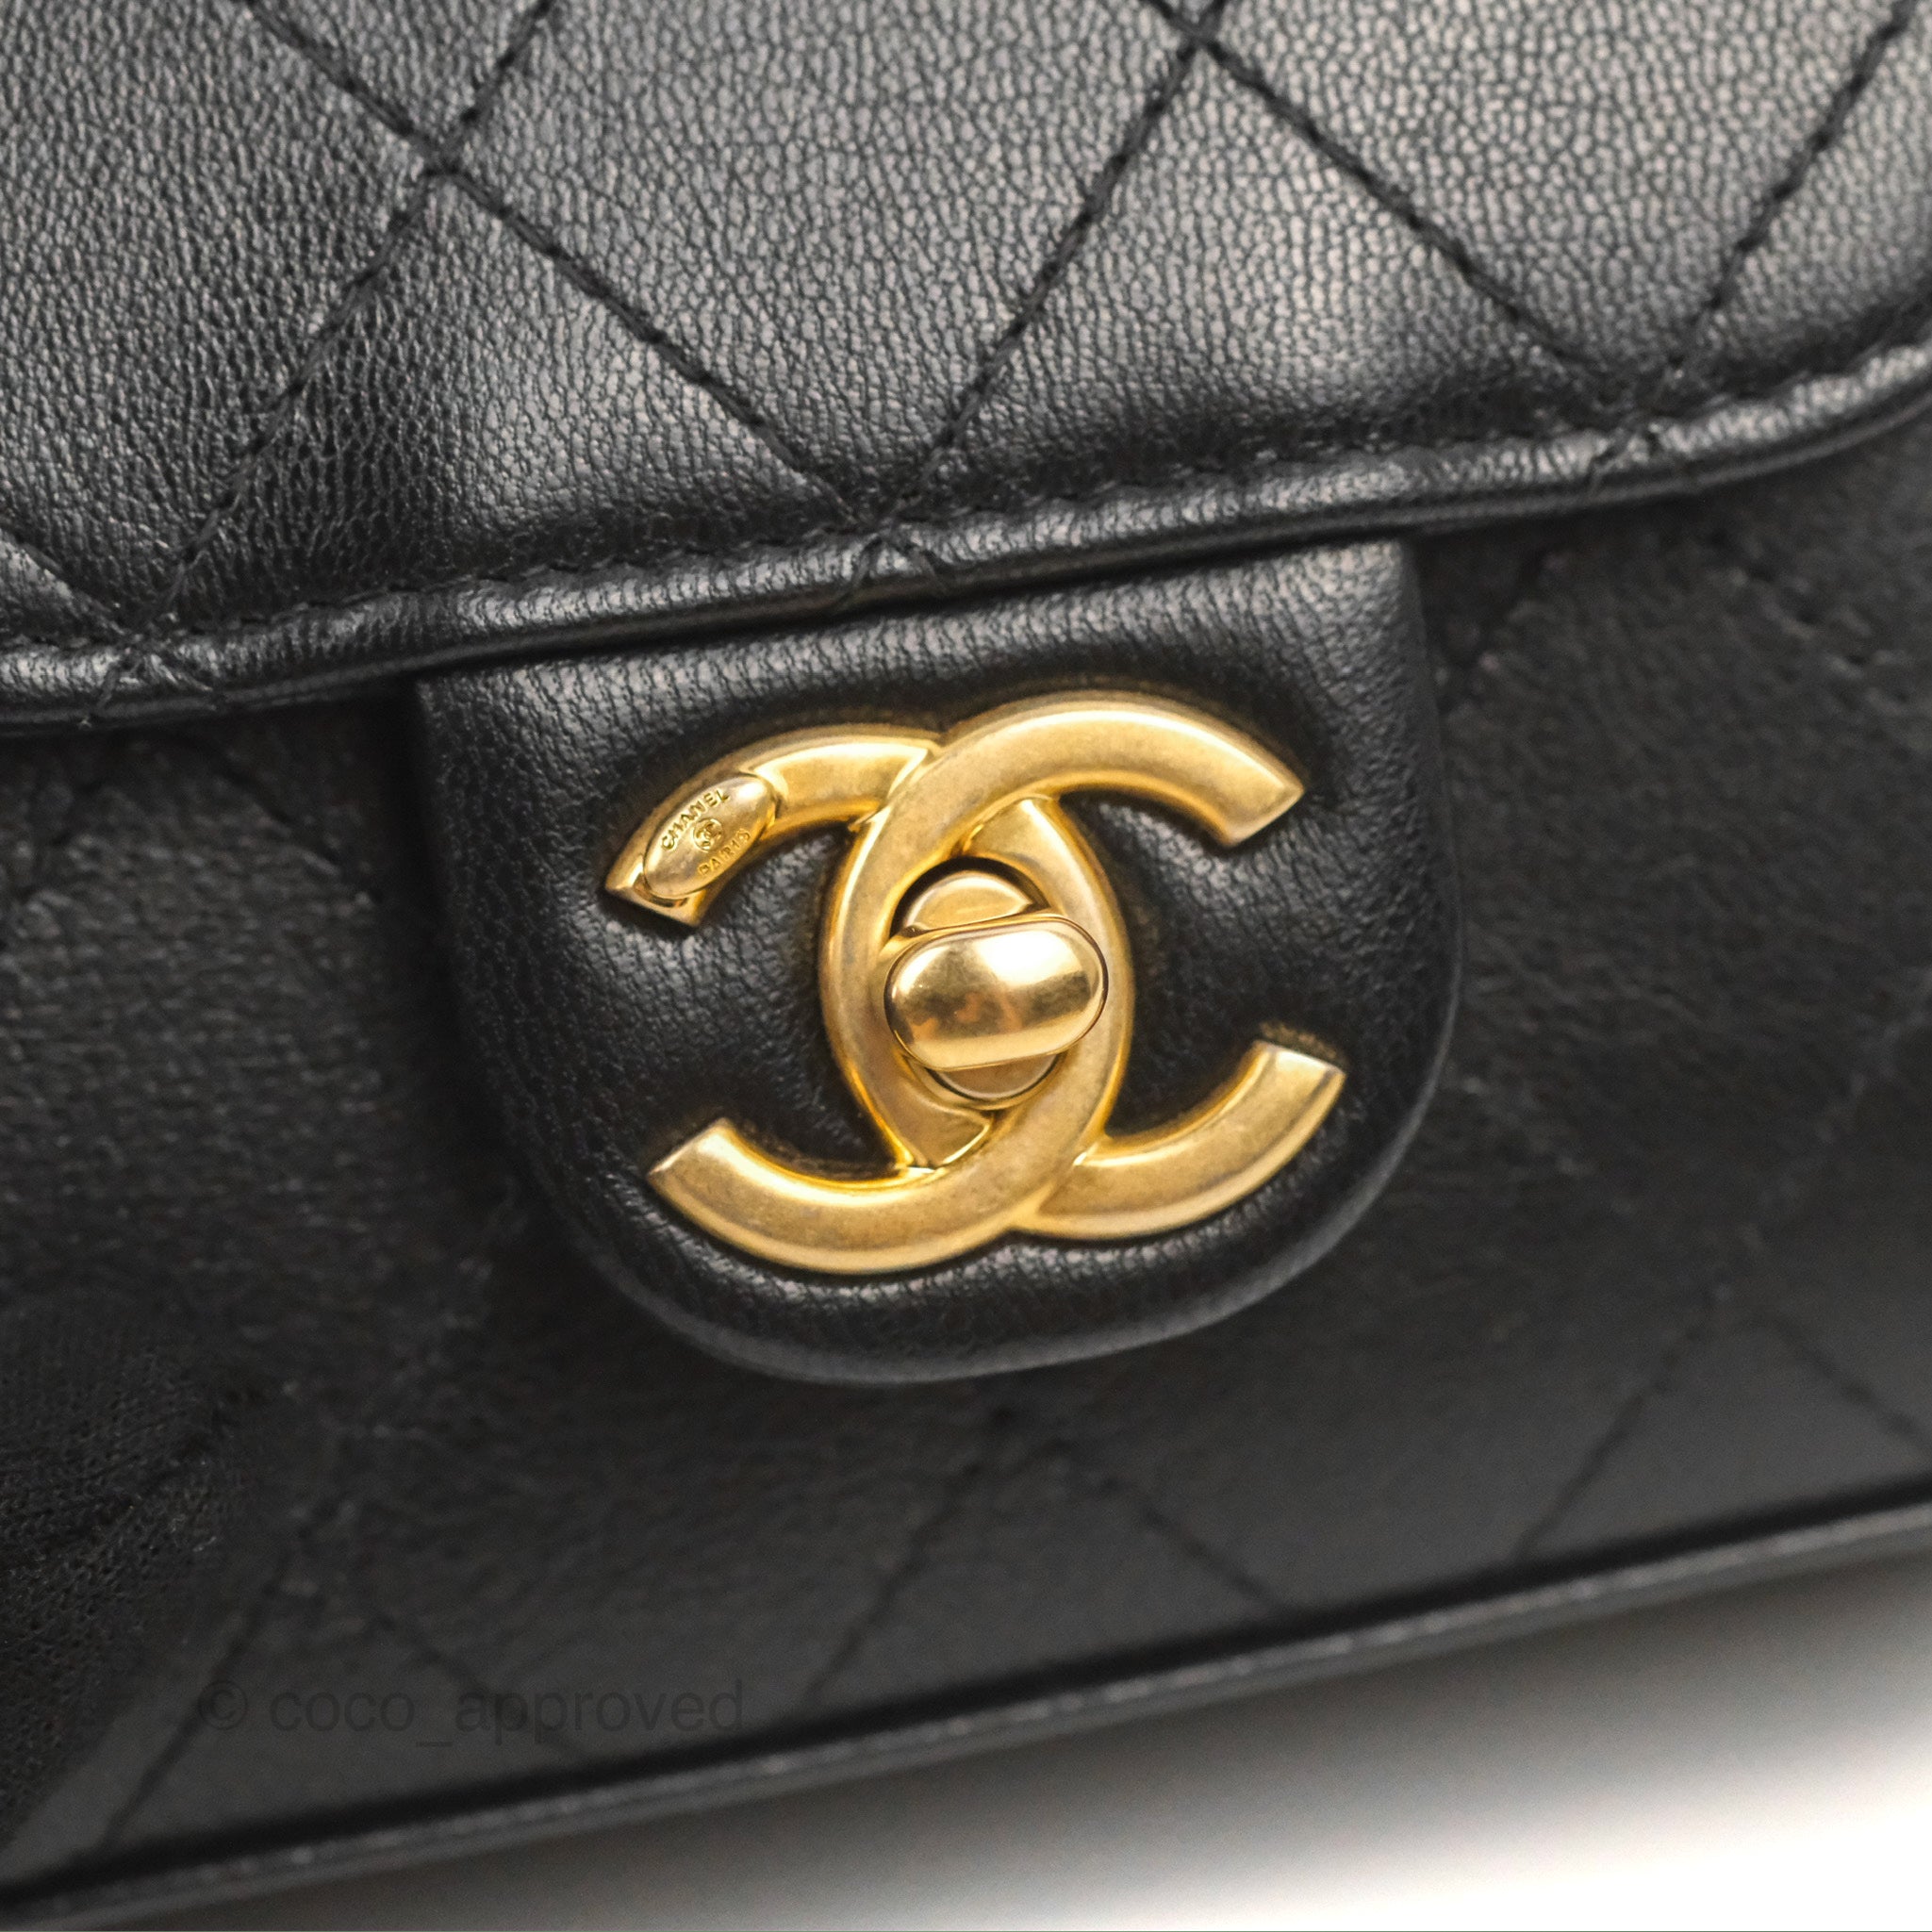 Chanel Navy Chic Pearls Small Flap Bag In Leather With Gold Hardware –  Trésor Vintage